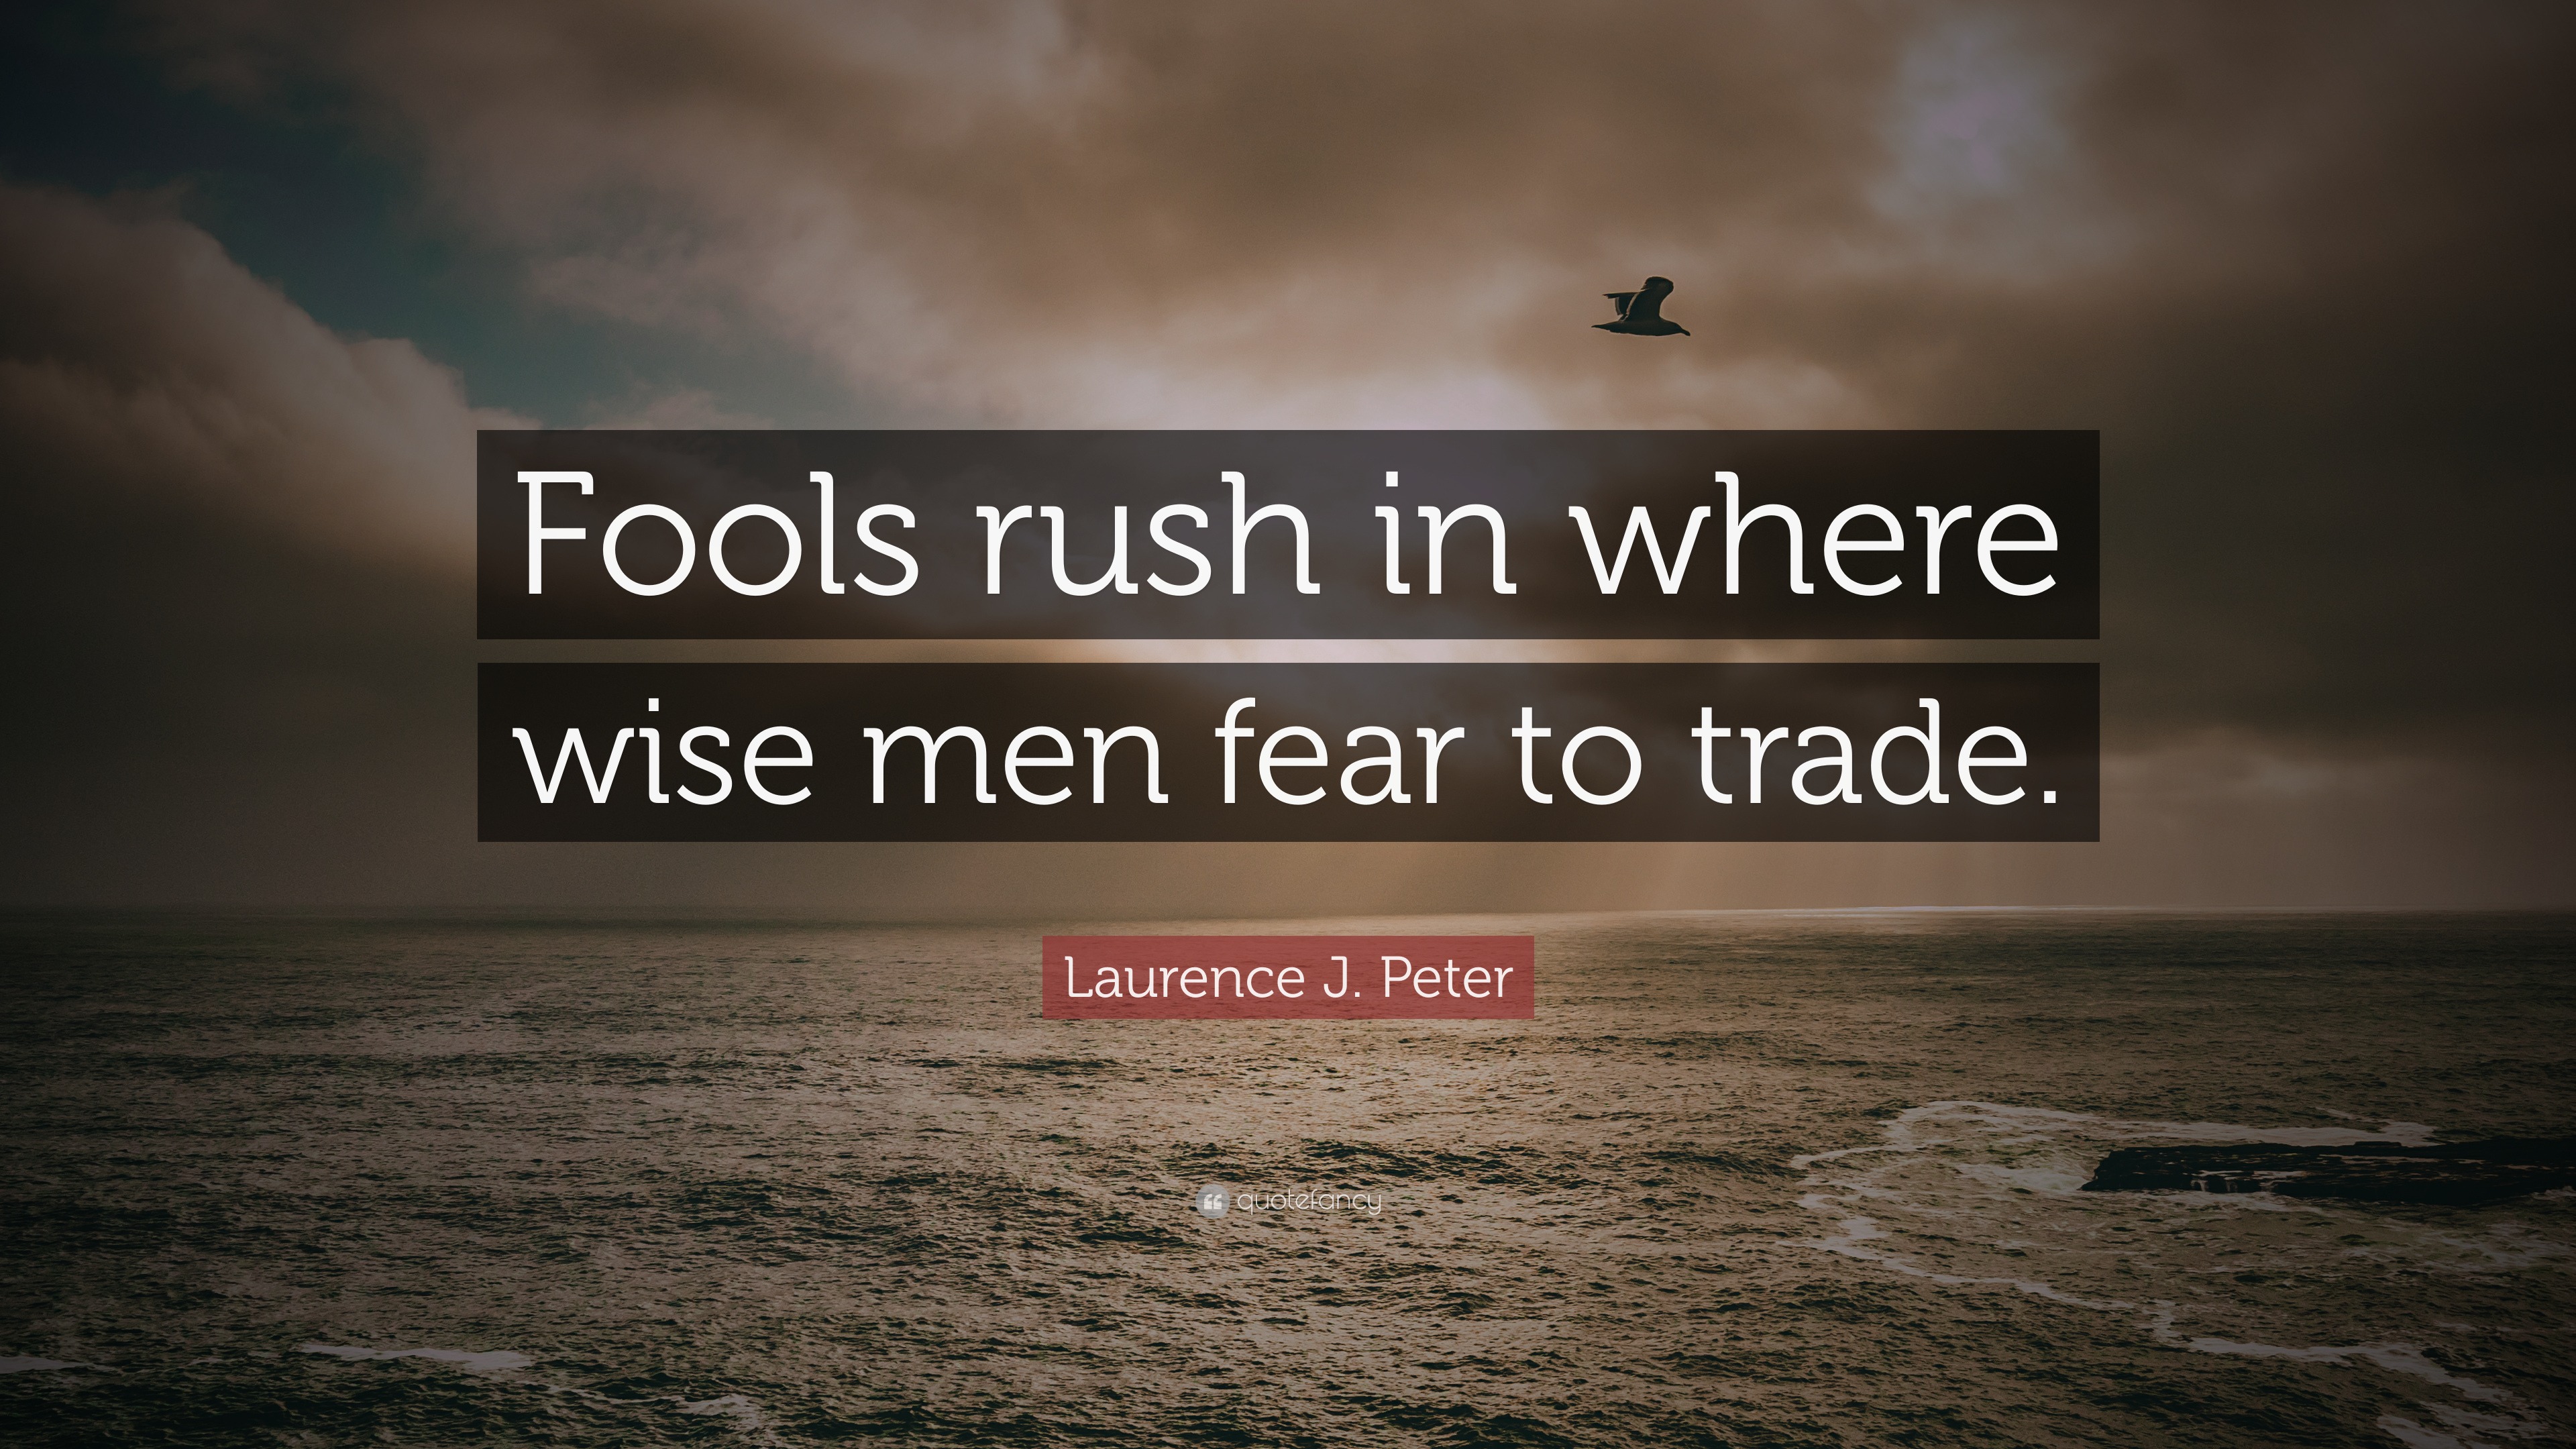 Laurence J. Peter Quote: “Fools rush in where wise men fear to trade.”